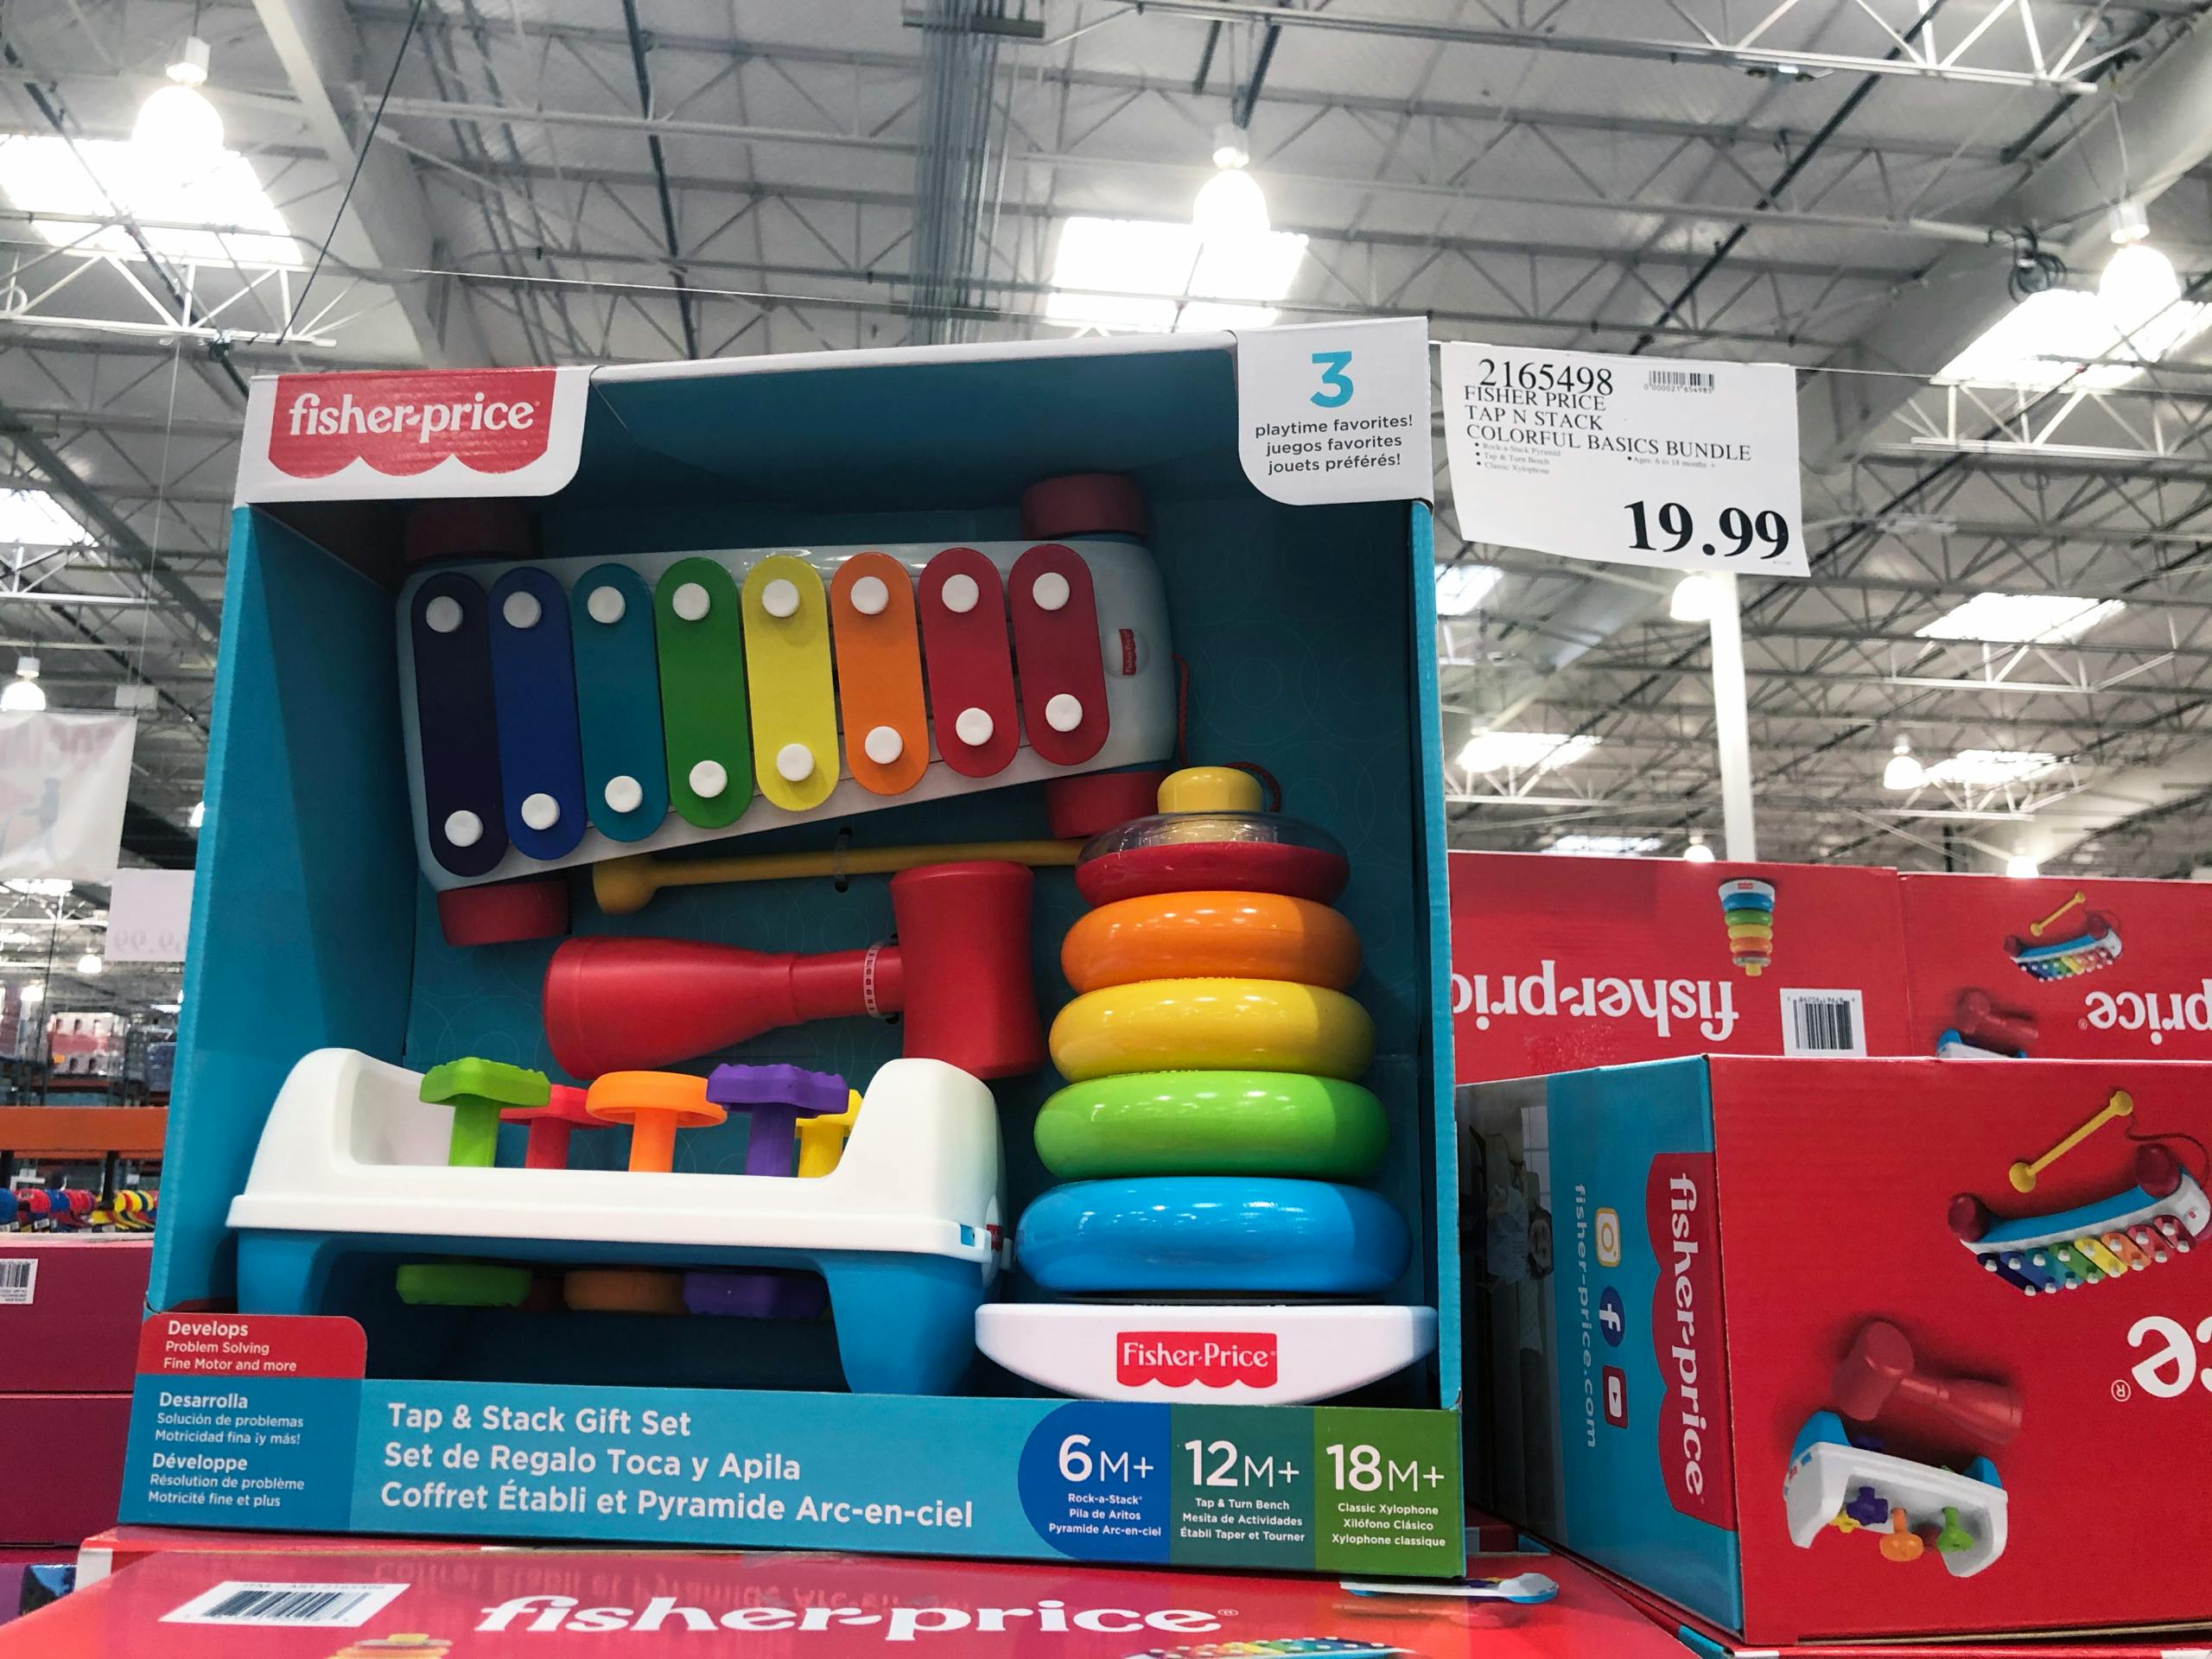 Costco Fisher Price Tap Stack Gift Set Black Friday 2020 1600462620 1600462620 Scaled ?auto=compress